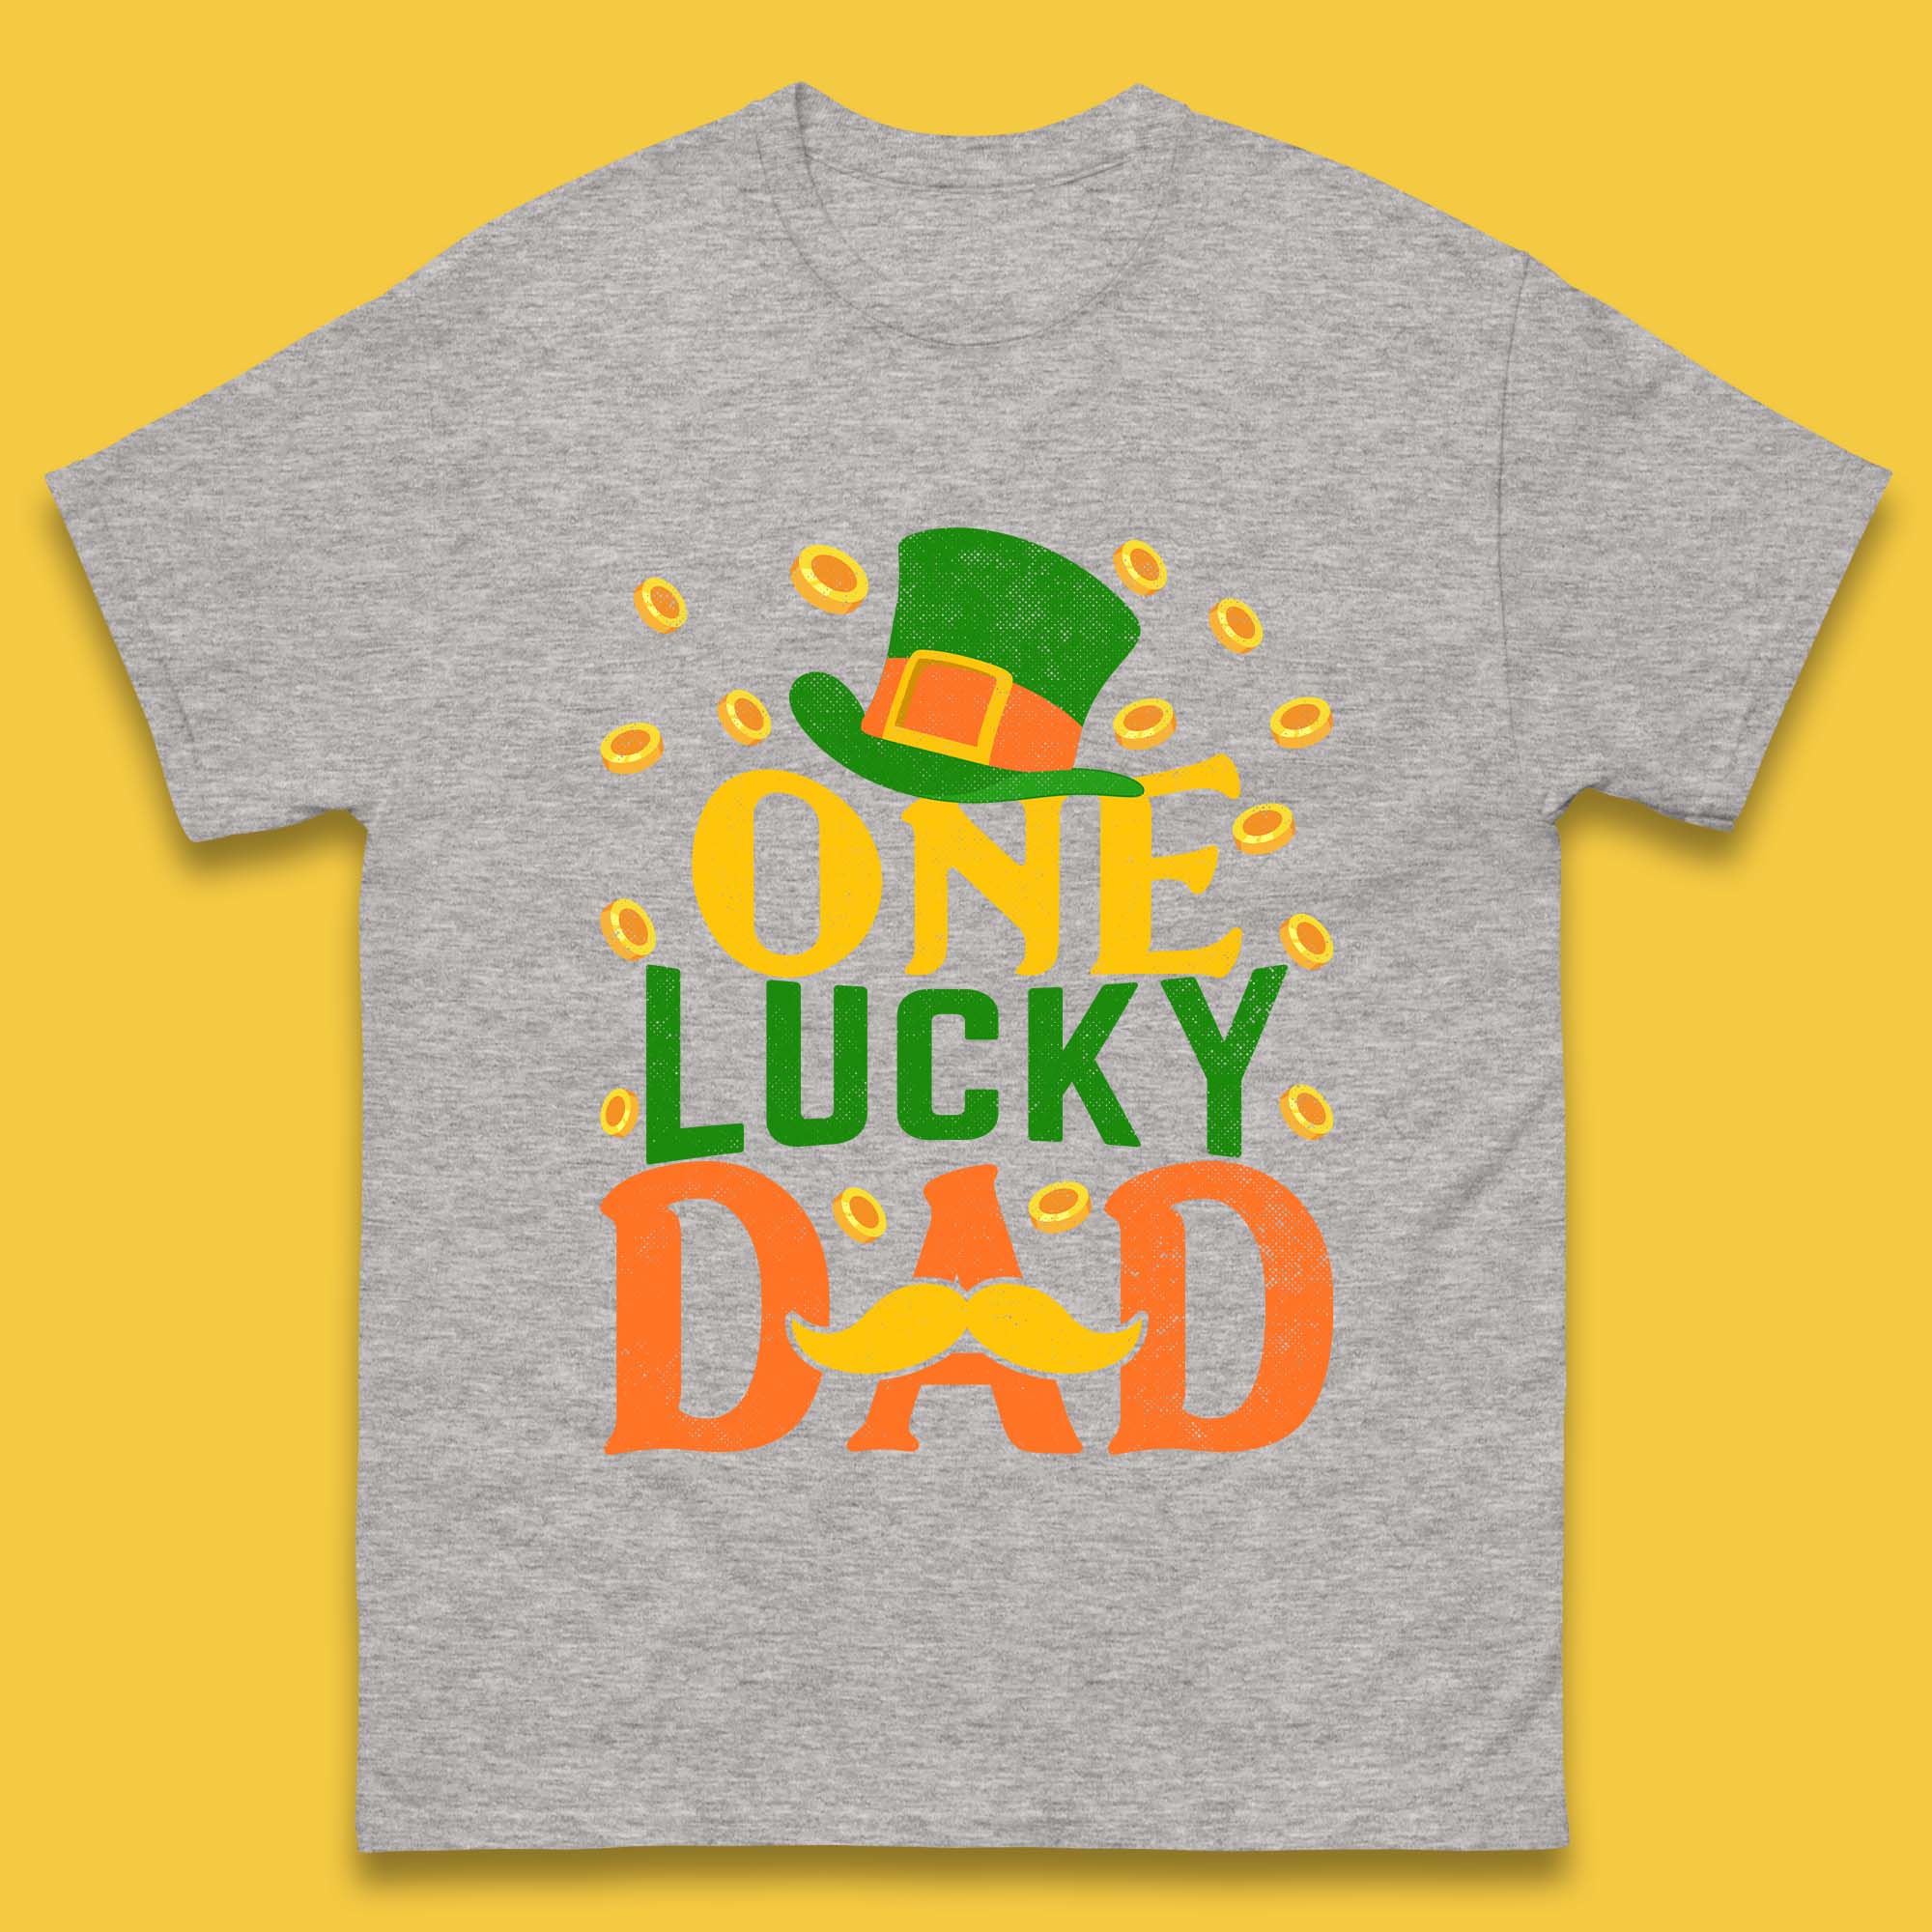 One Lucky Dad Patrick's Day Mens T-Shirt